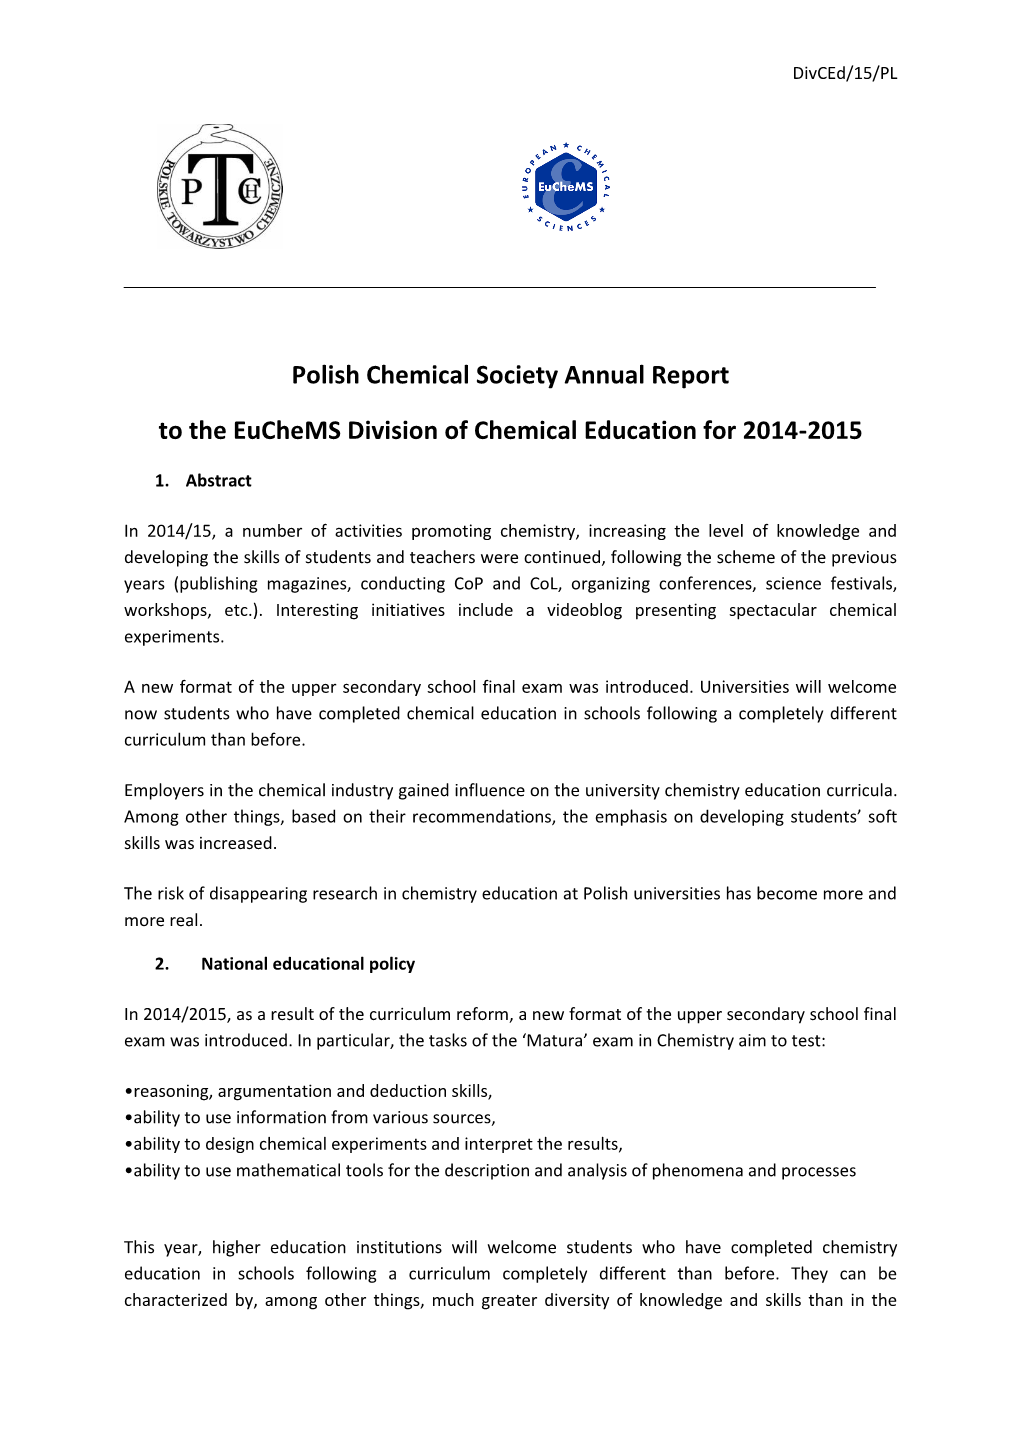 Polish Chemical Society Annual Report to the Euchems Division Of